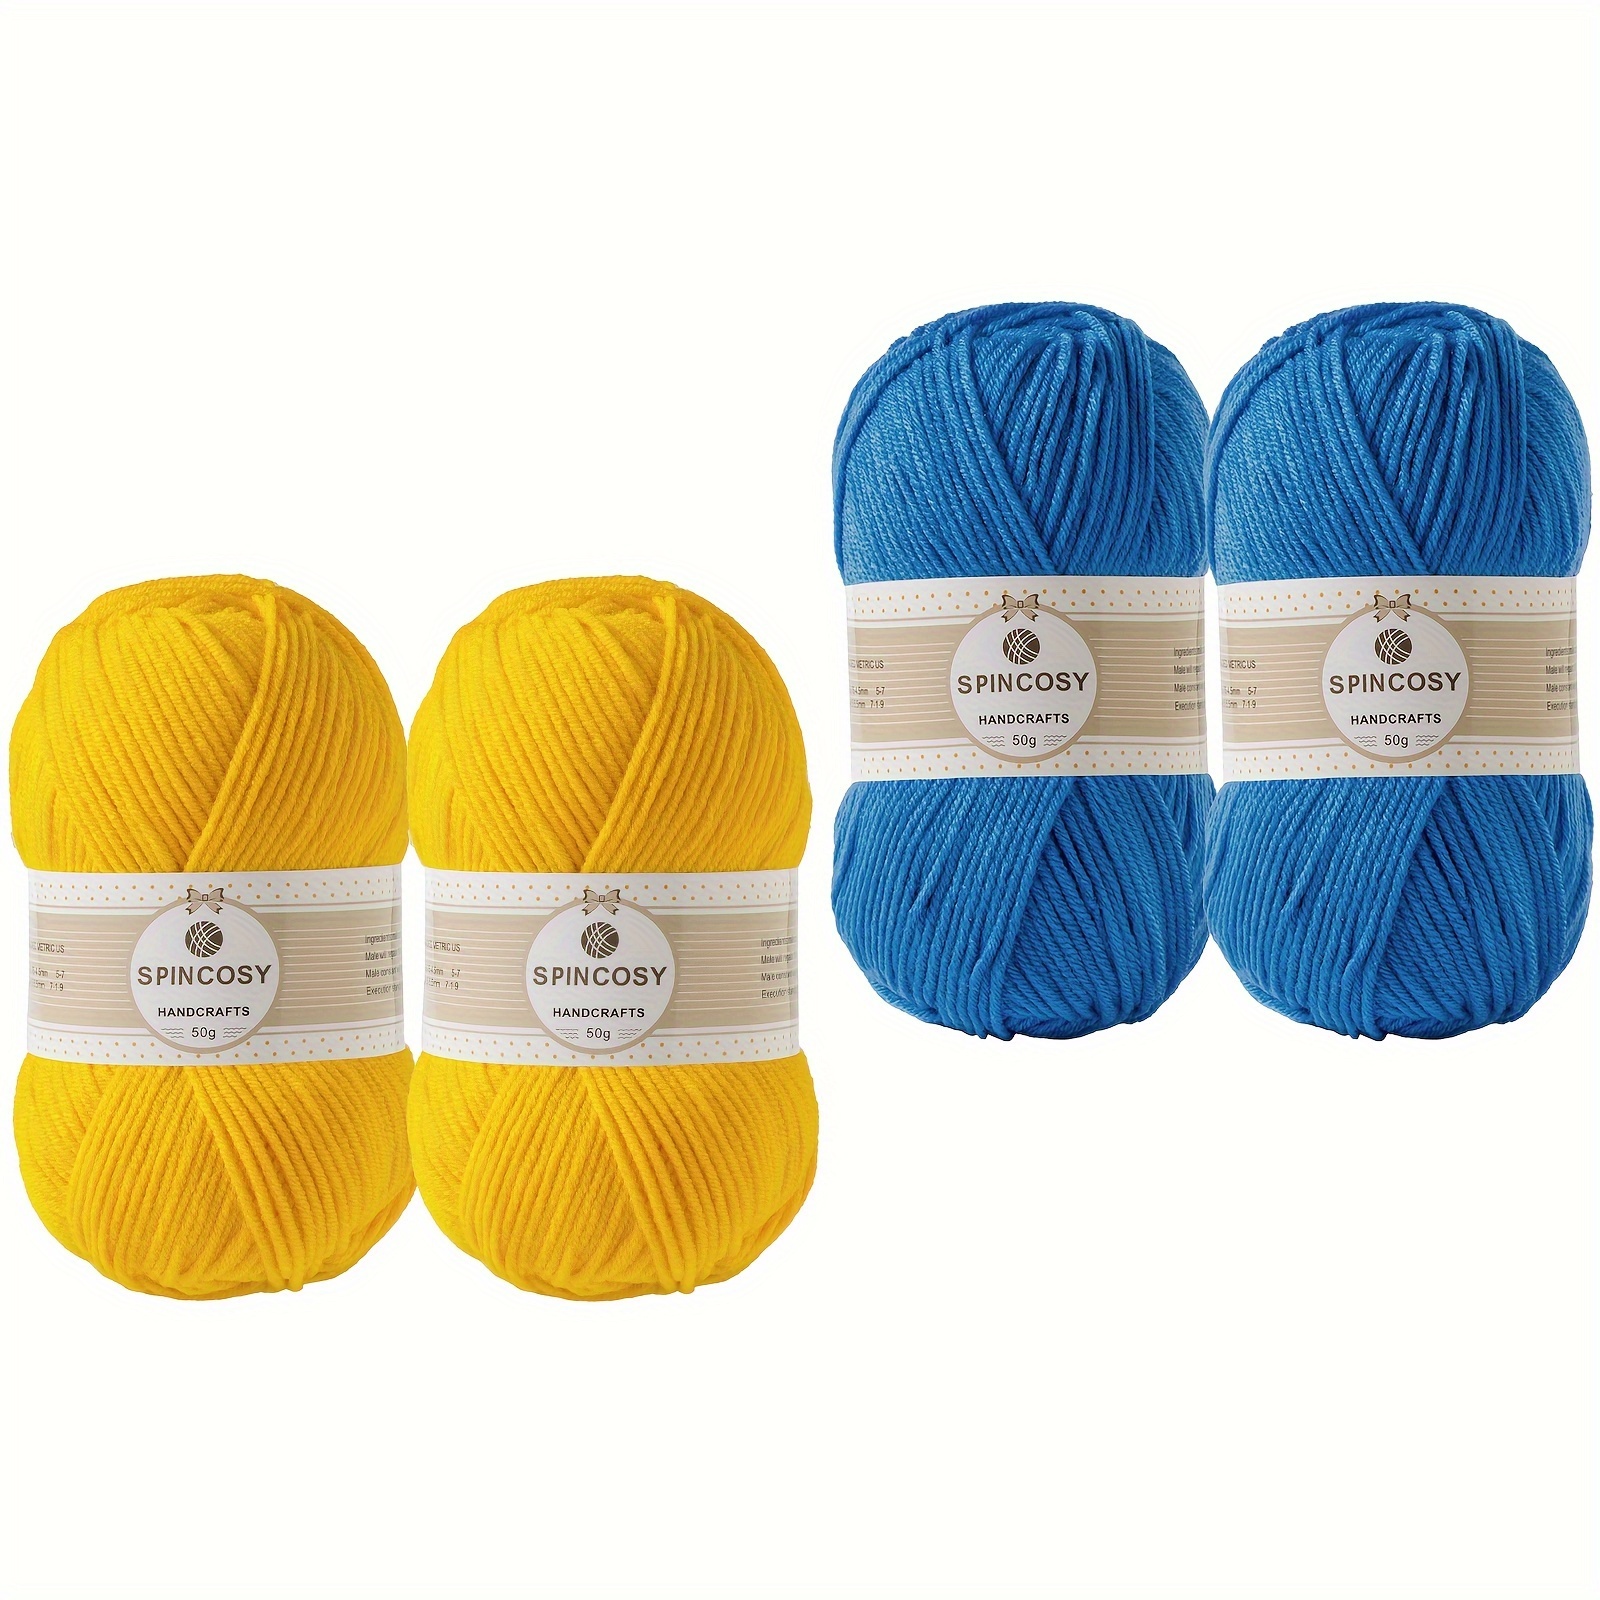 3 Pack Beginners Crochet Yarn, Deep Blue Yarn for Crocheting Knitting  Beginners, Easy-to-See Stitches, Chunky Thick Bulky Cotton Soft Yarn for